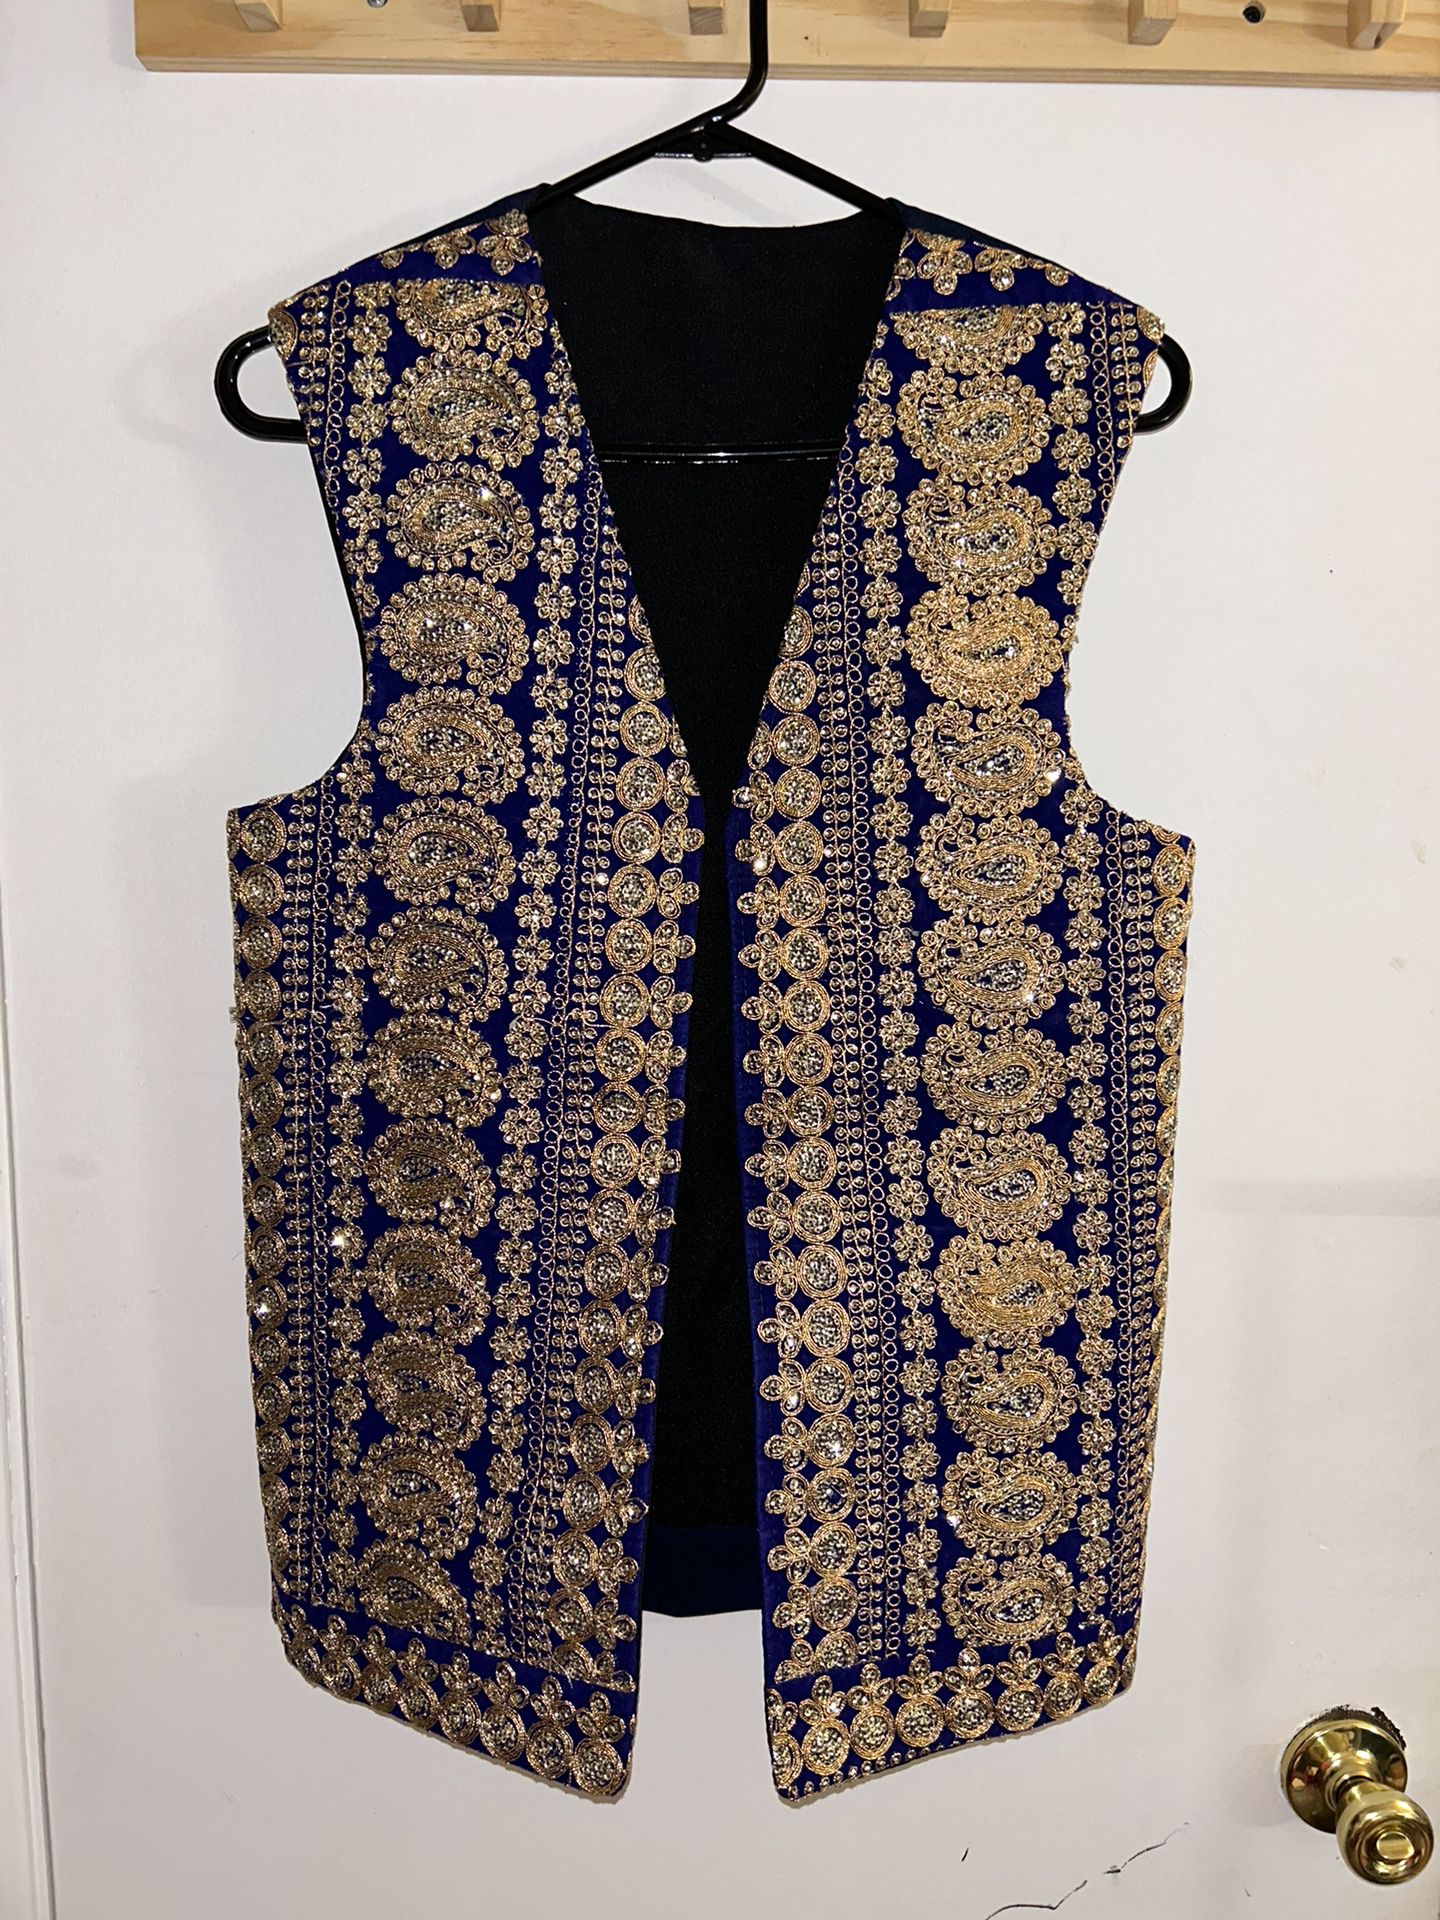 Afghan Traditional men's velvet waistcoat with heavy embroidery and Stone